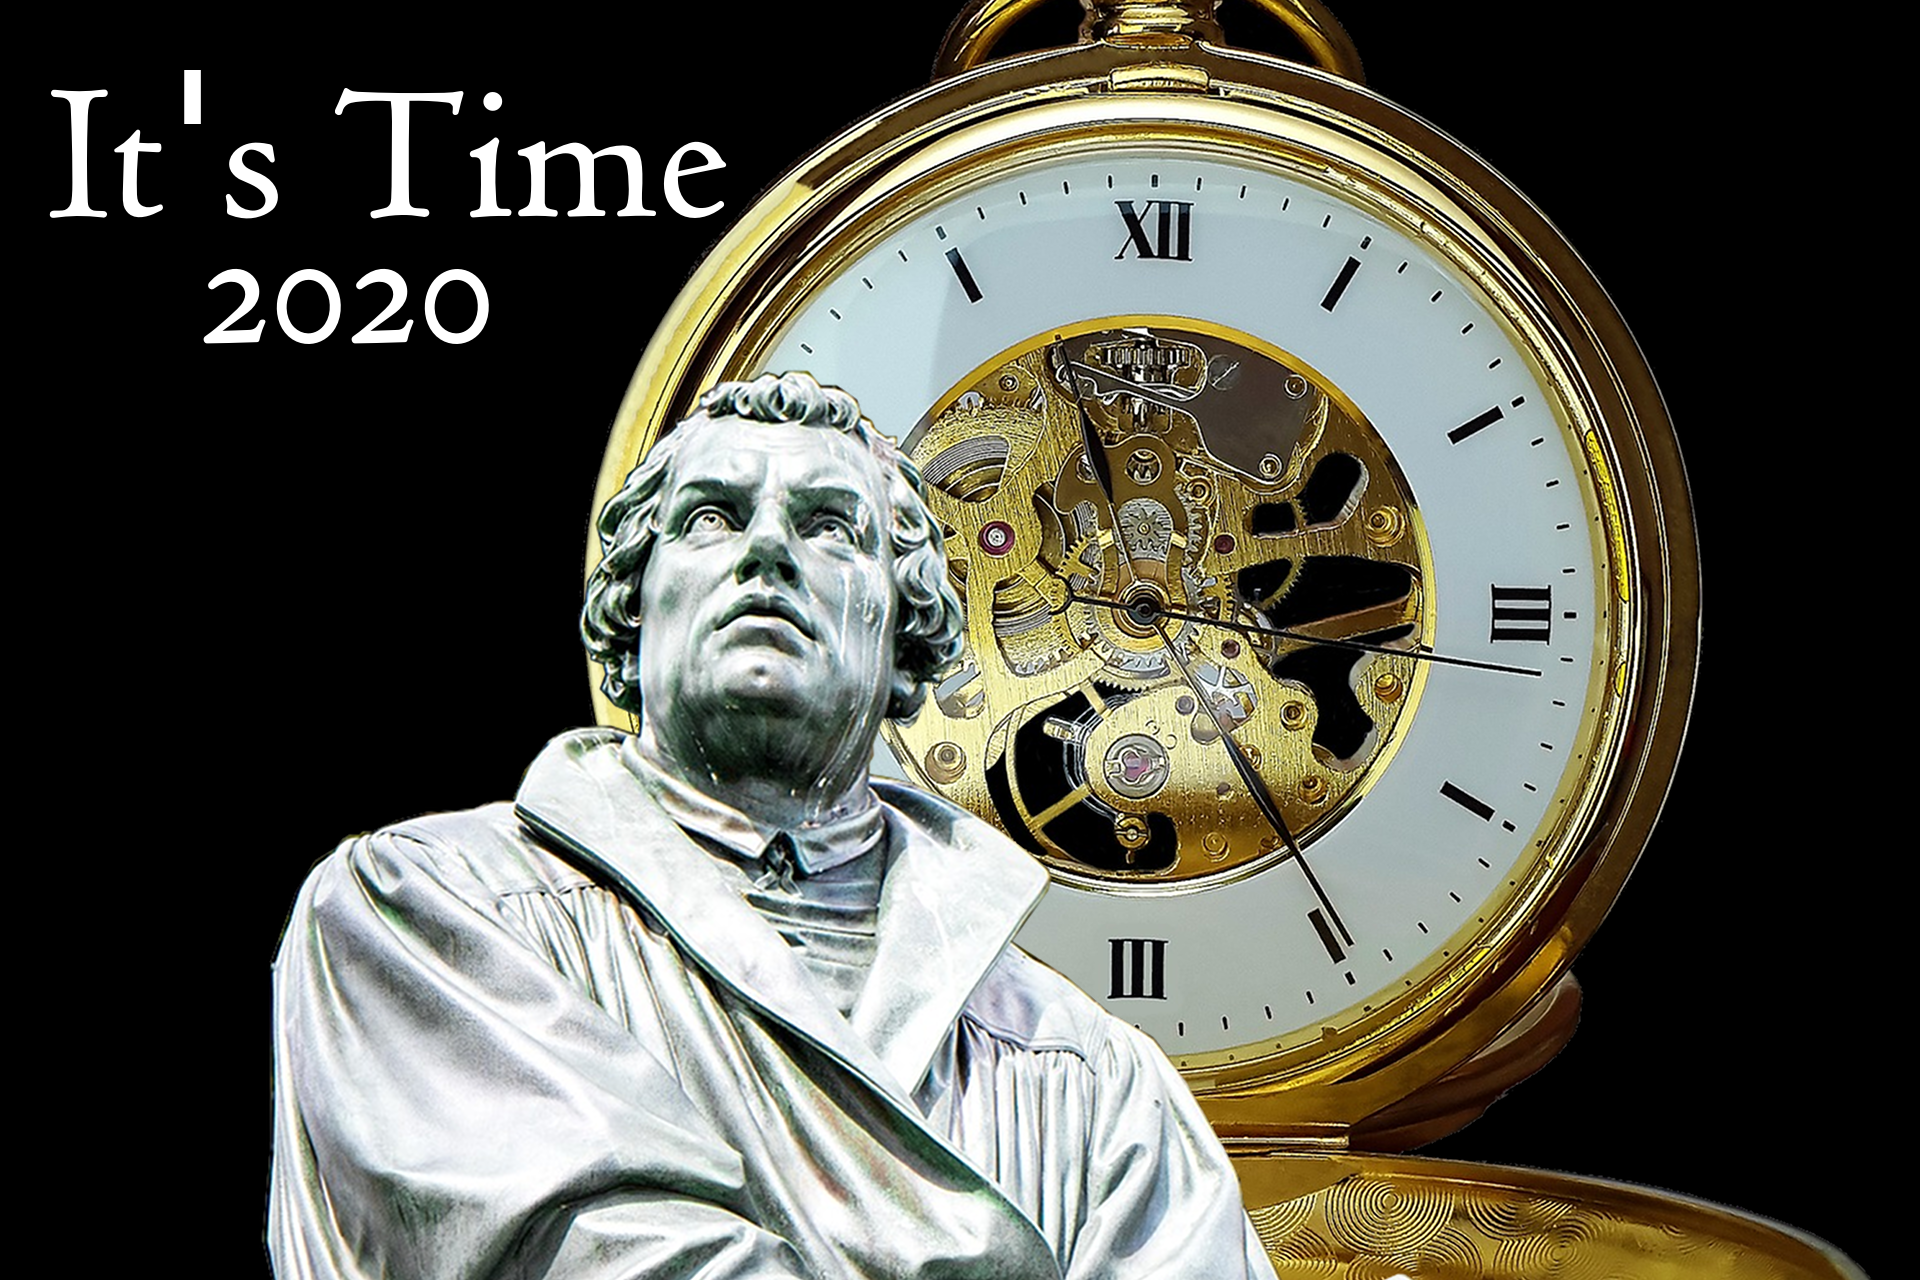 It’s Time 2020